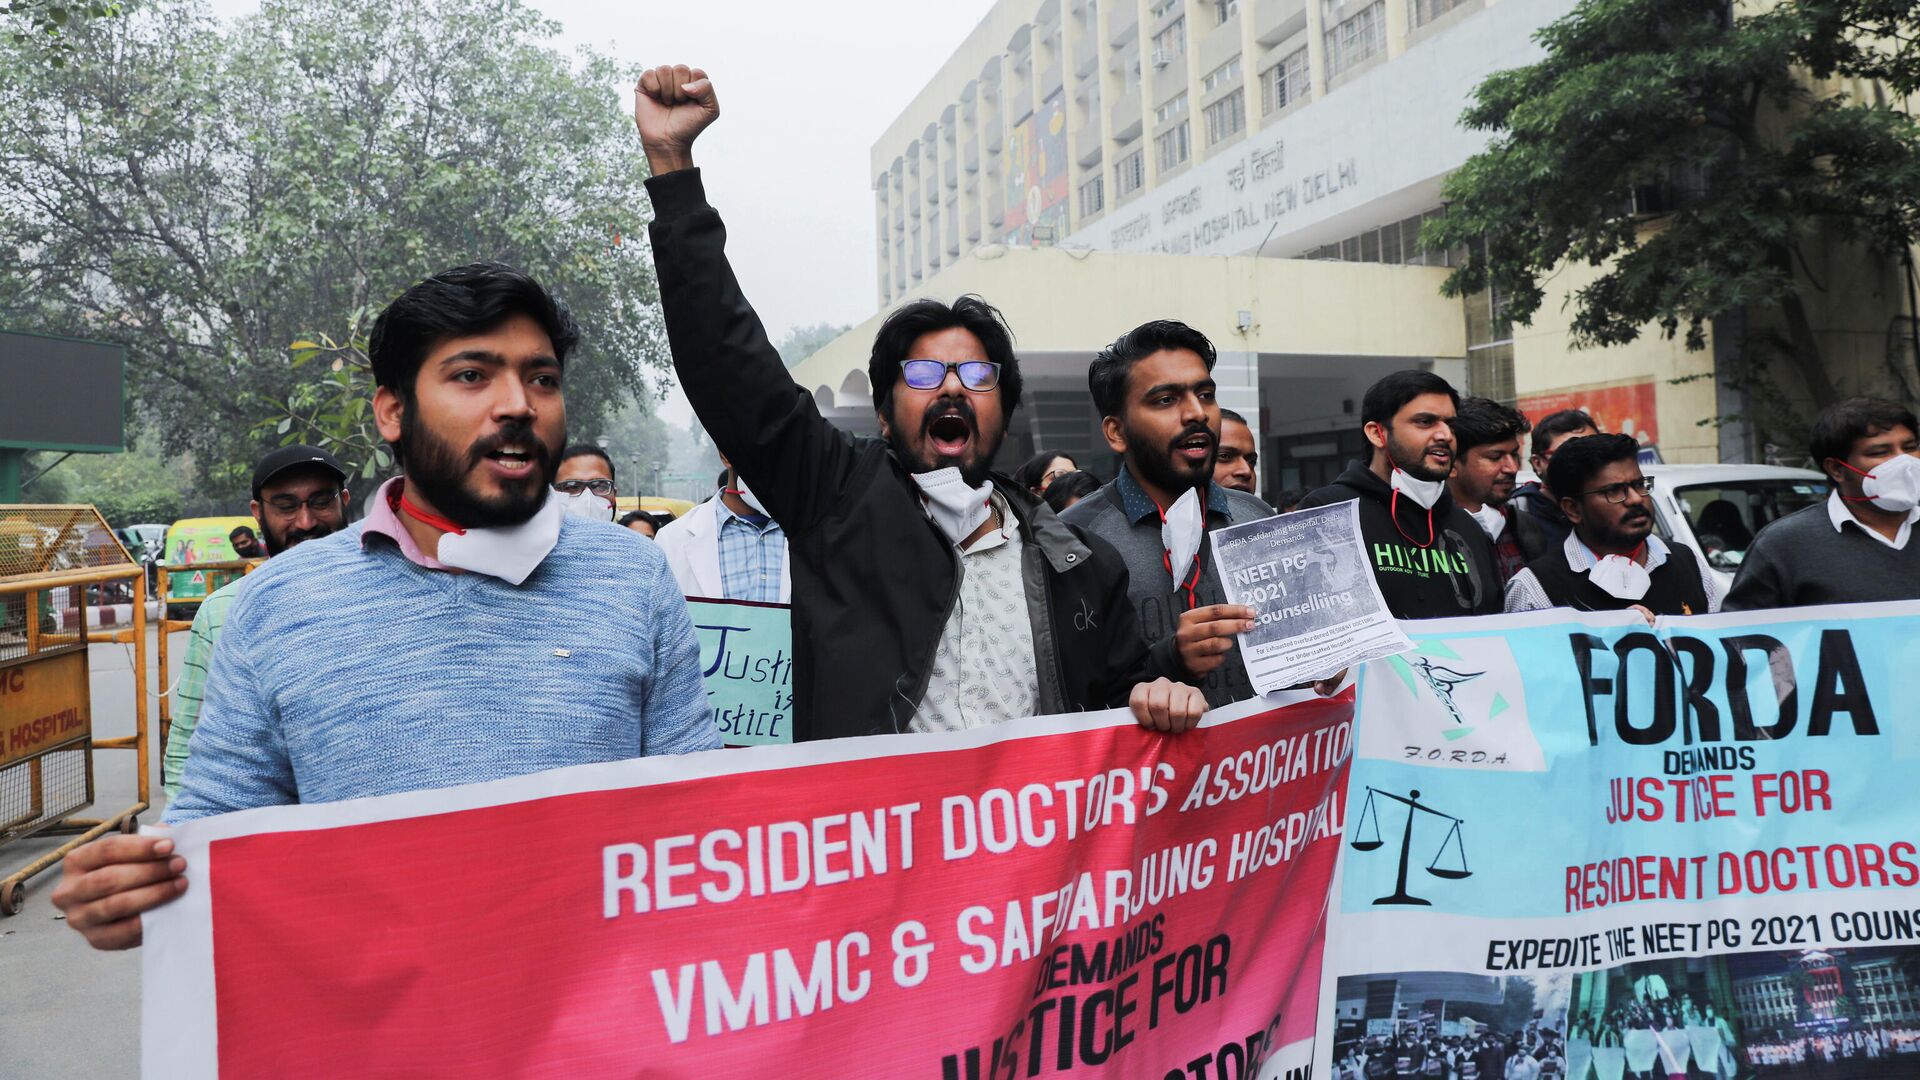 Resident doctors of the Centre-run Safdarjung Hospital participate in a protest called by the Federation of Resident Doctors' Association (FORDA) over the delay in National Eligibility cum Entrance Test Postgraduate (NEET-PG) 2021 counselling, at the hospital in New Delhi, India, December 3, 2021 - Sputnik International, 1920, 06.12.2021